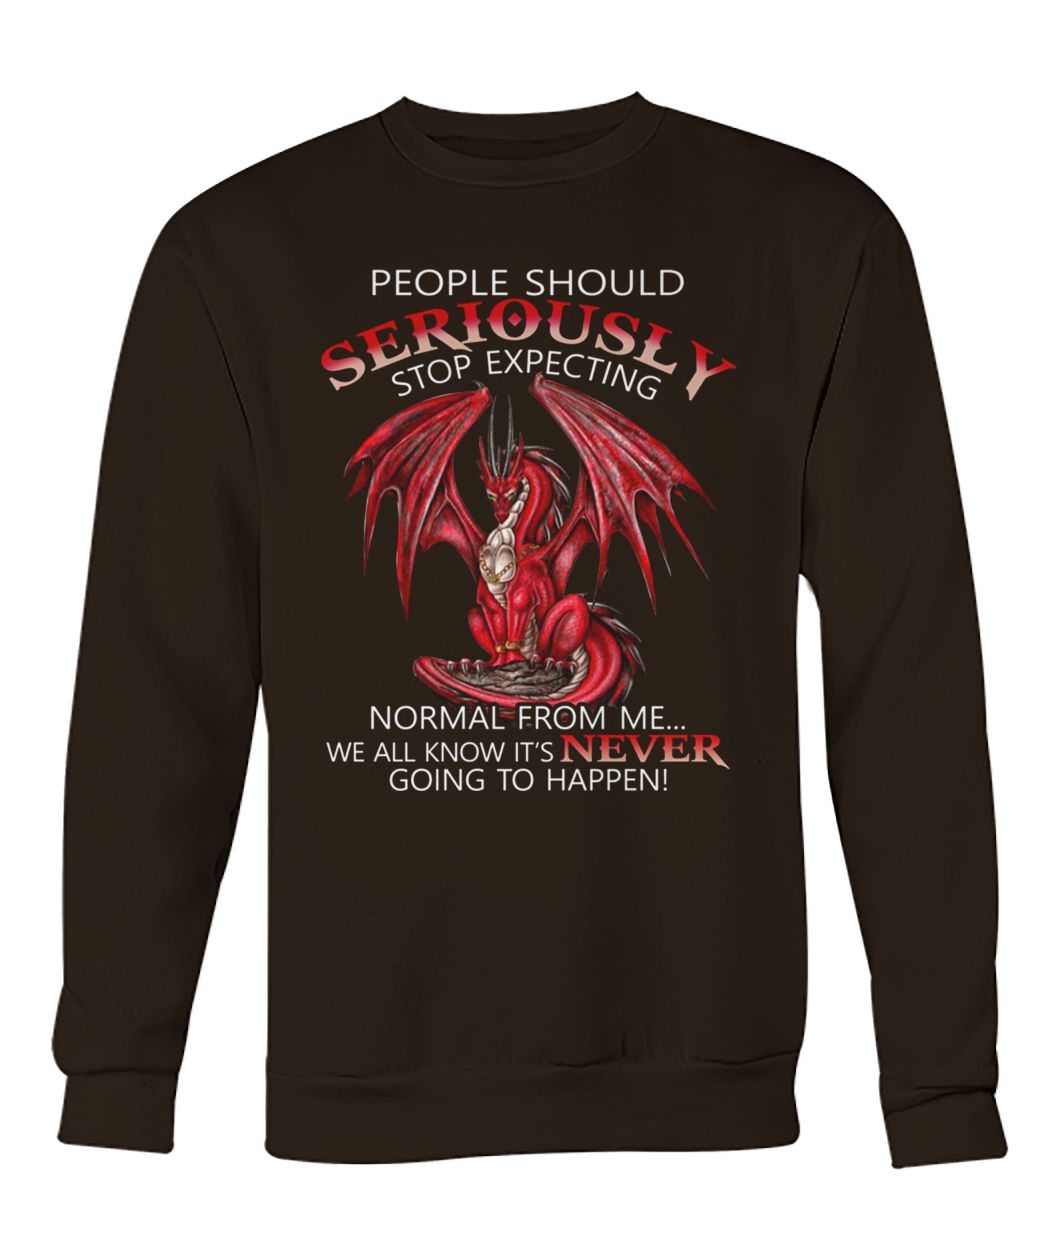 People should seriously stop expecting normal from me red dragon crew neck sweatshirt